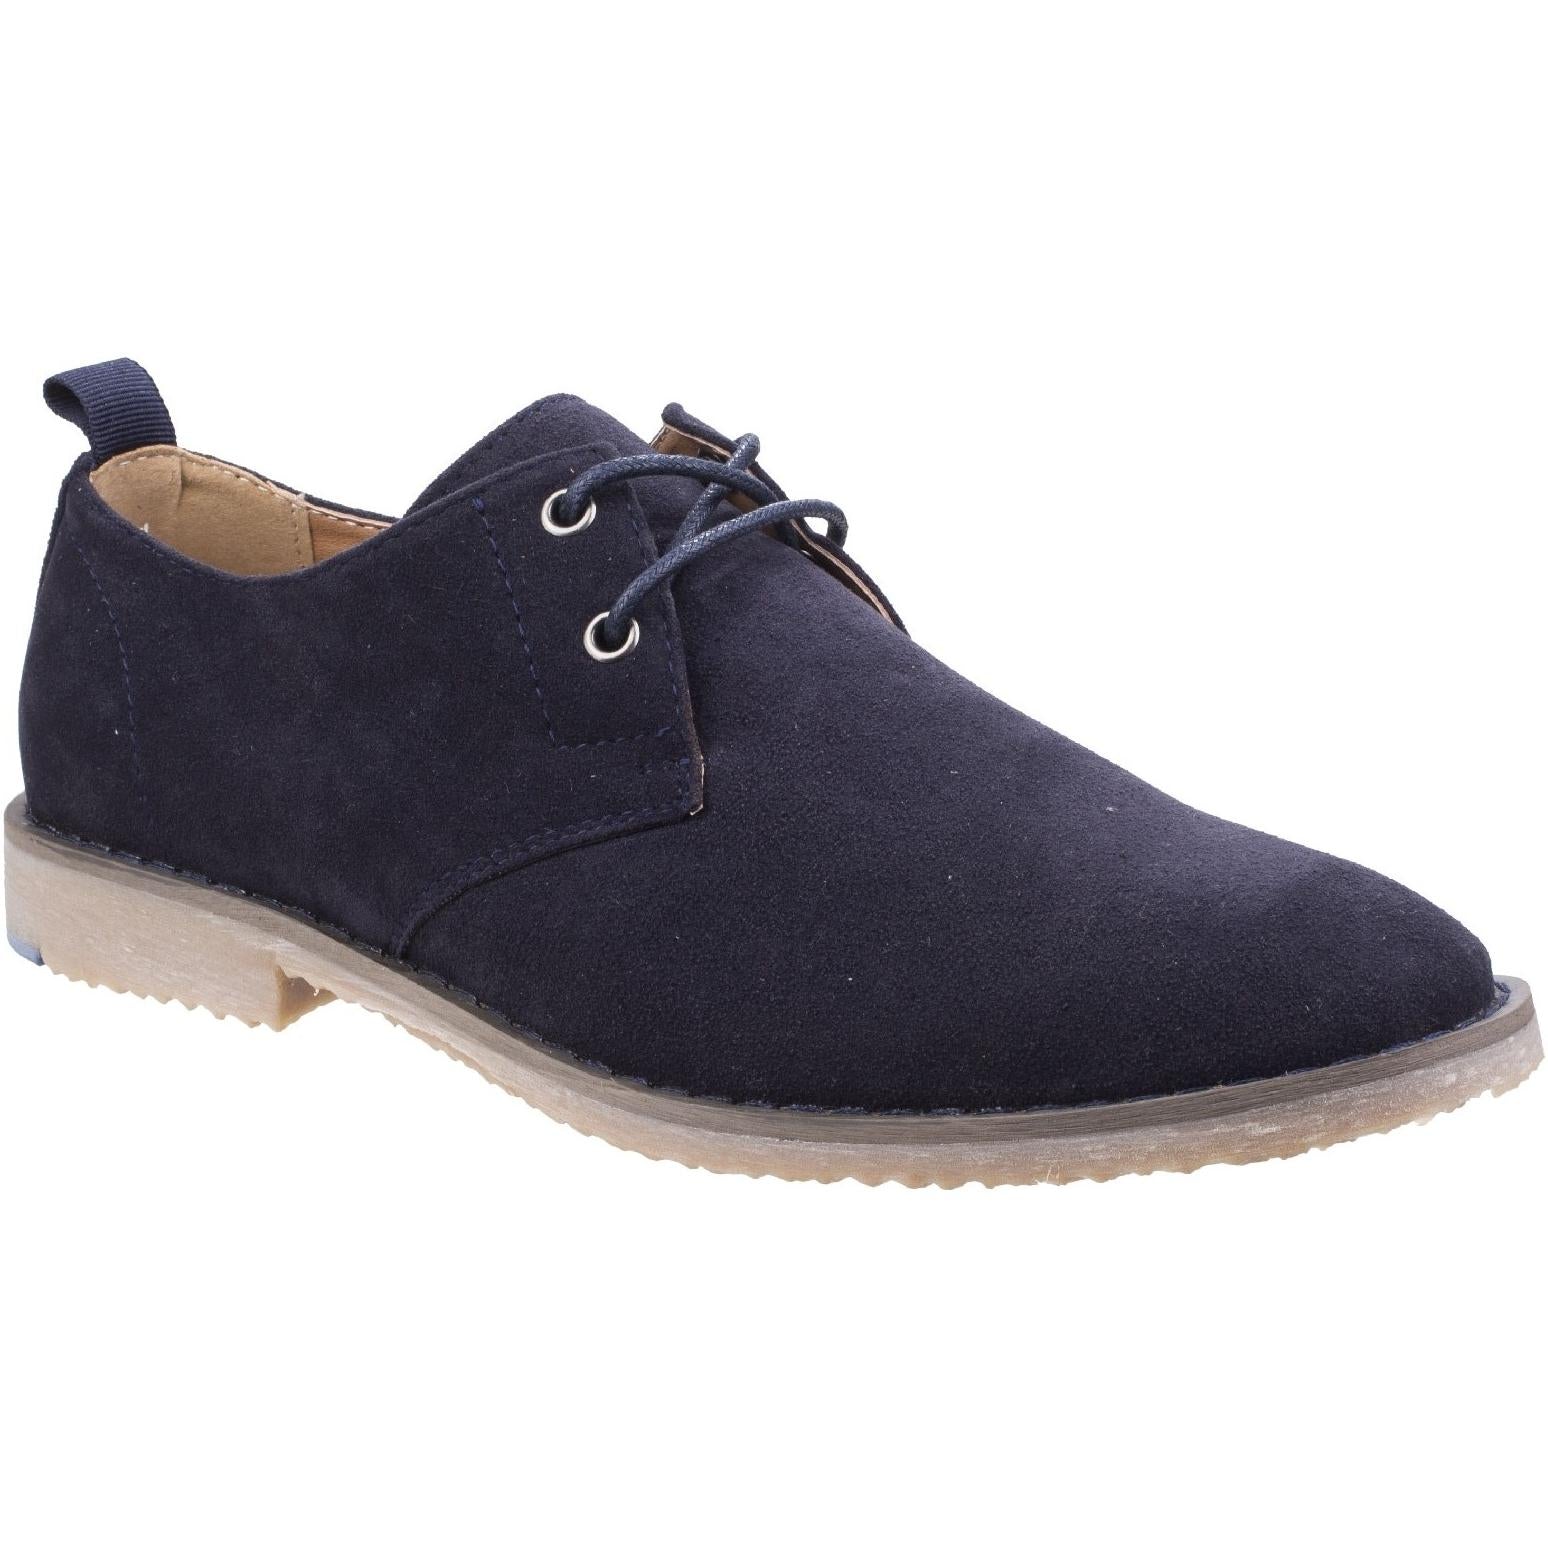 Stone Creek Rocky Gibson Lace Up Shoe